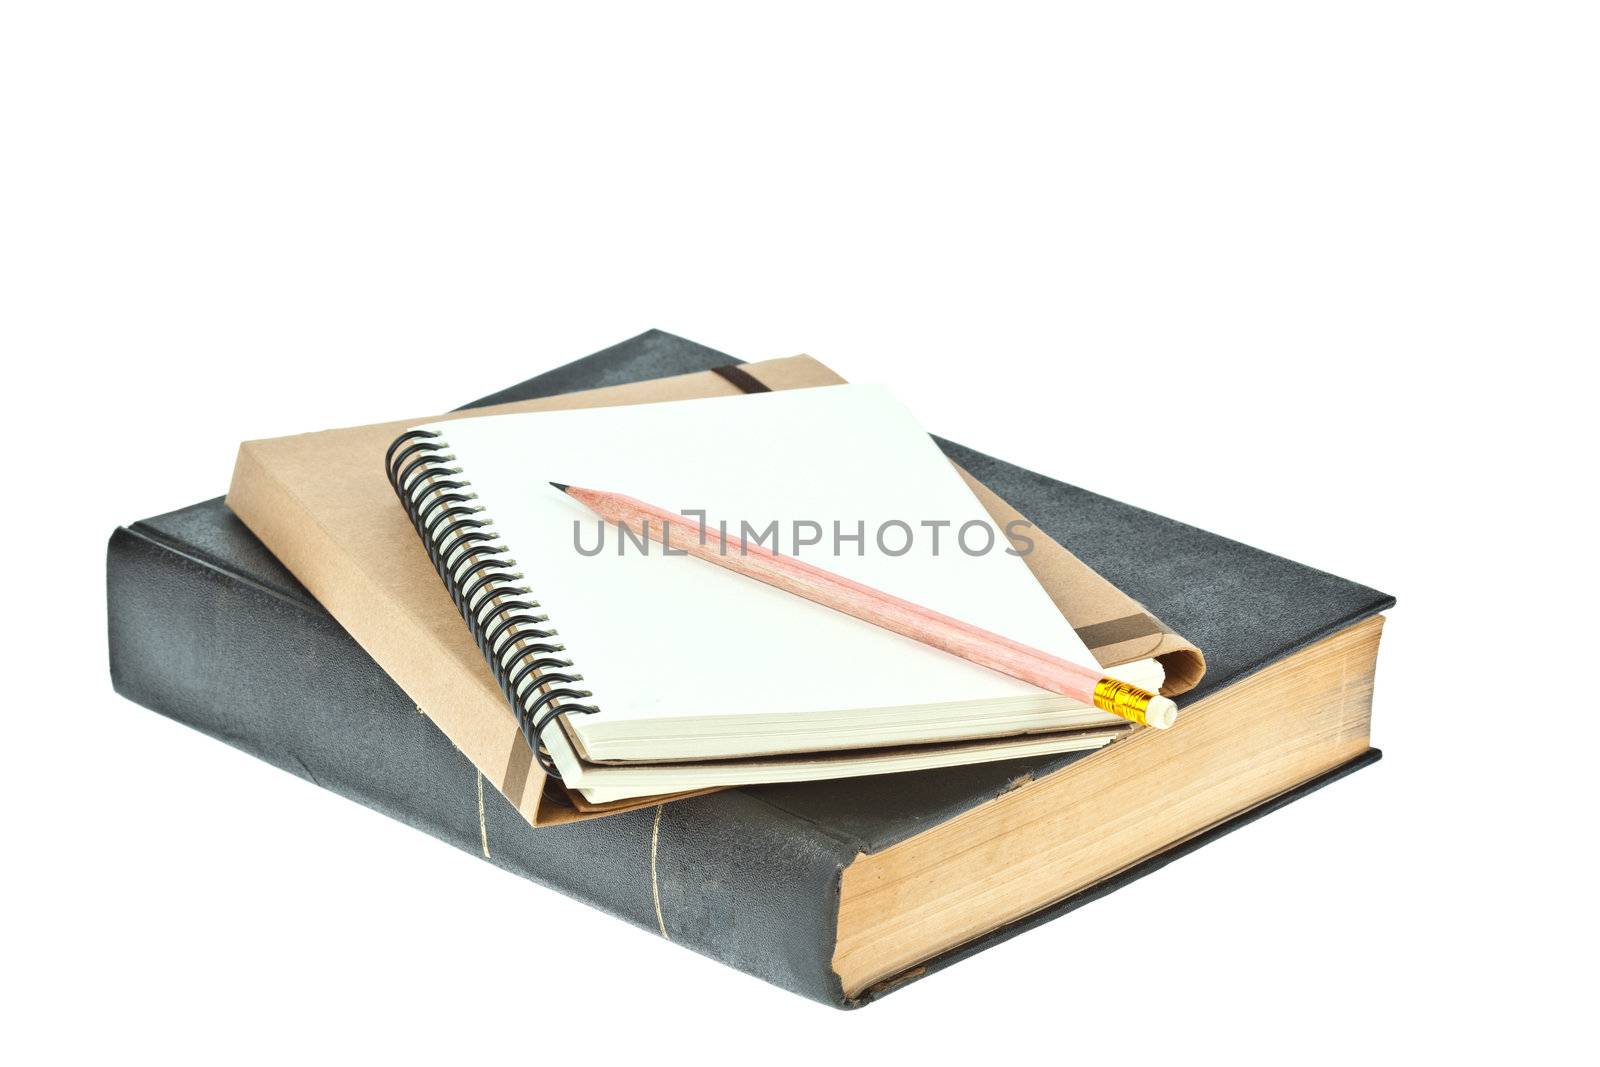 Pencil on Light cream color paper note book on brown book